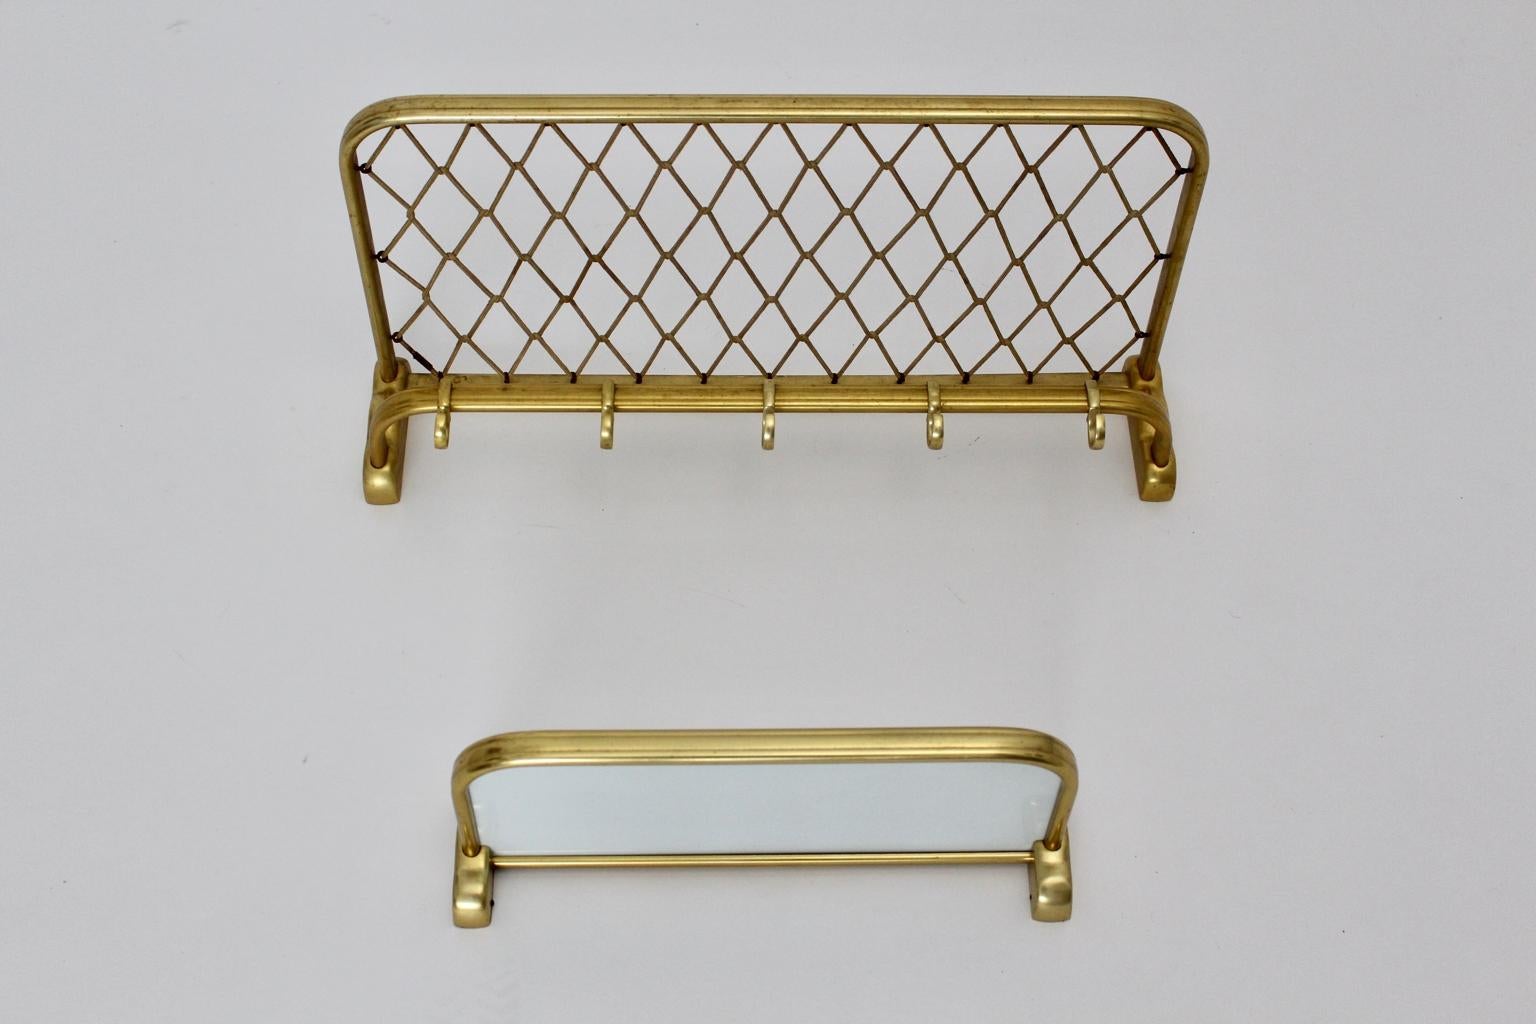 This presented mid century modern vintage wall wardrobe, which was made of golden anodized aluminum, consists of two parts. 
One part was made of a frame with nylon mesh and five hooks, while the other part consists of a storage tray, which is